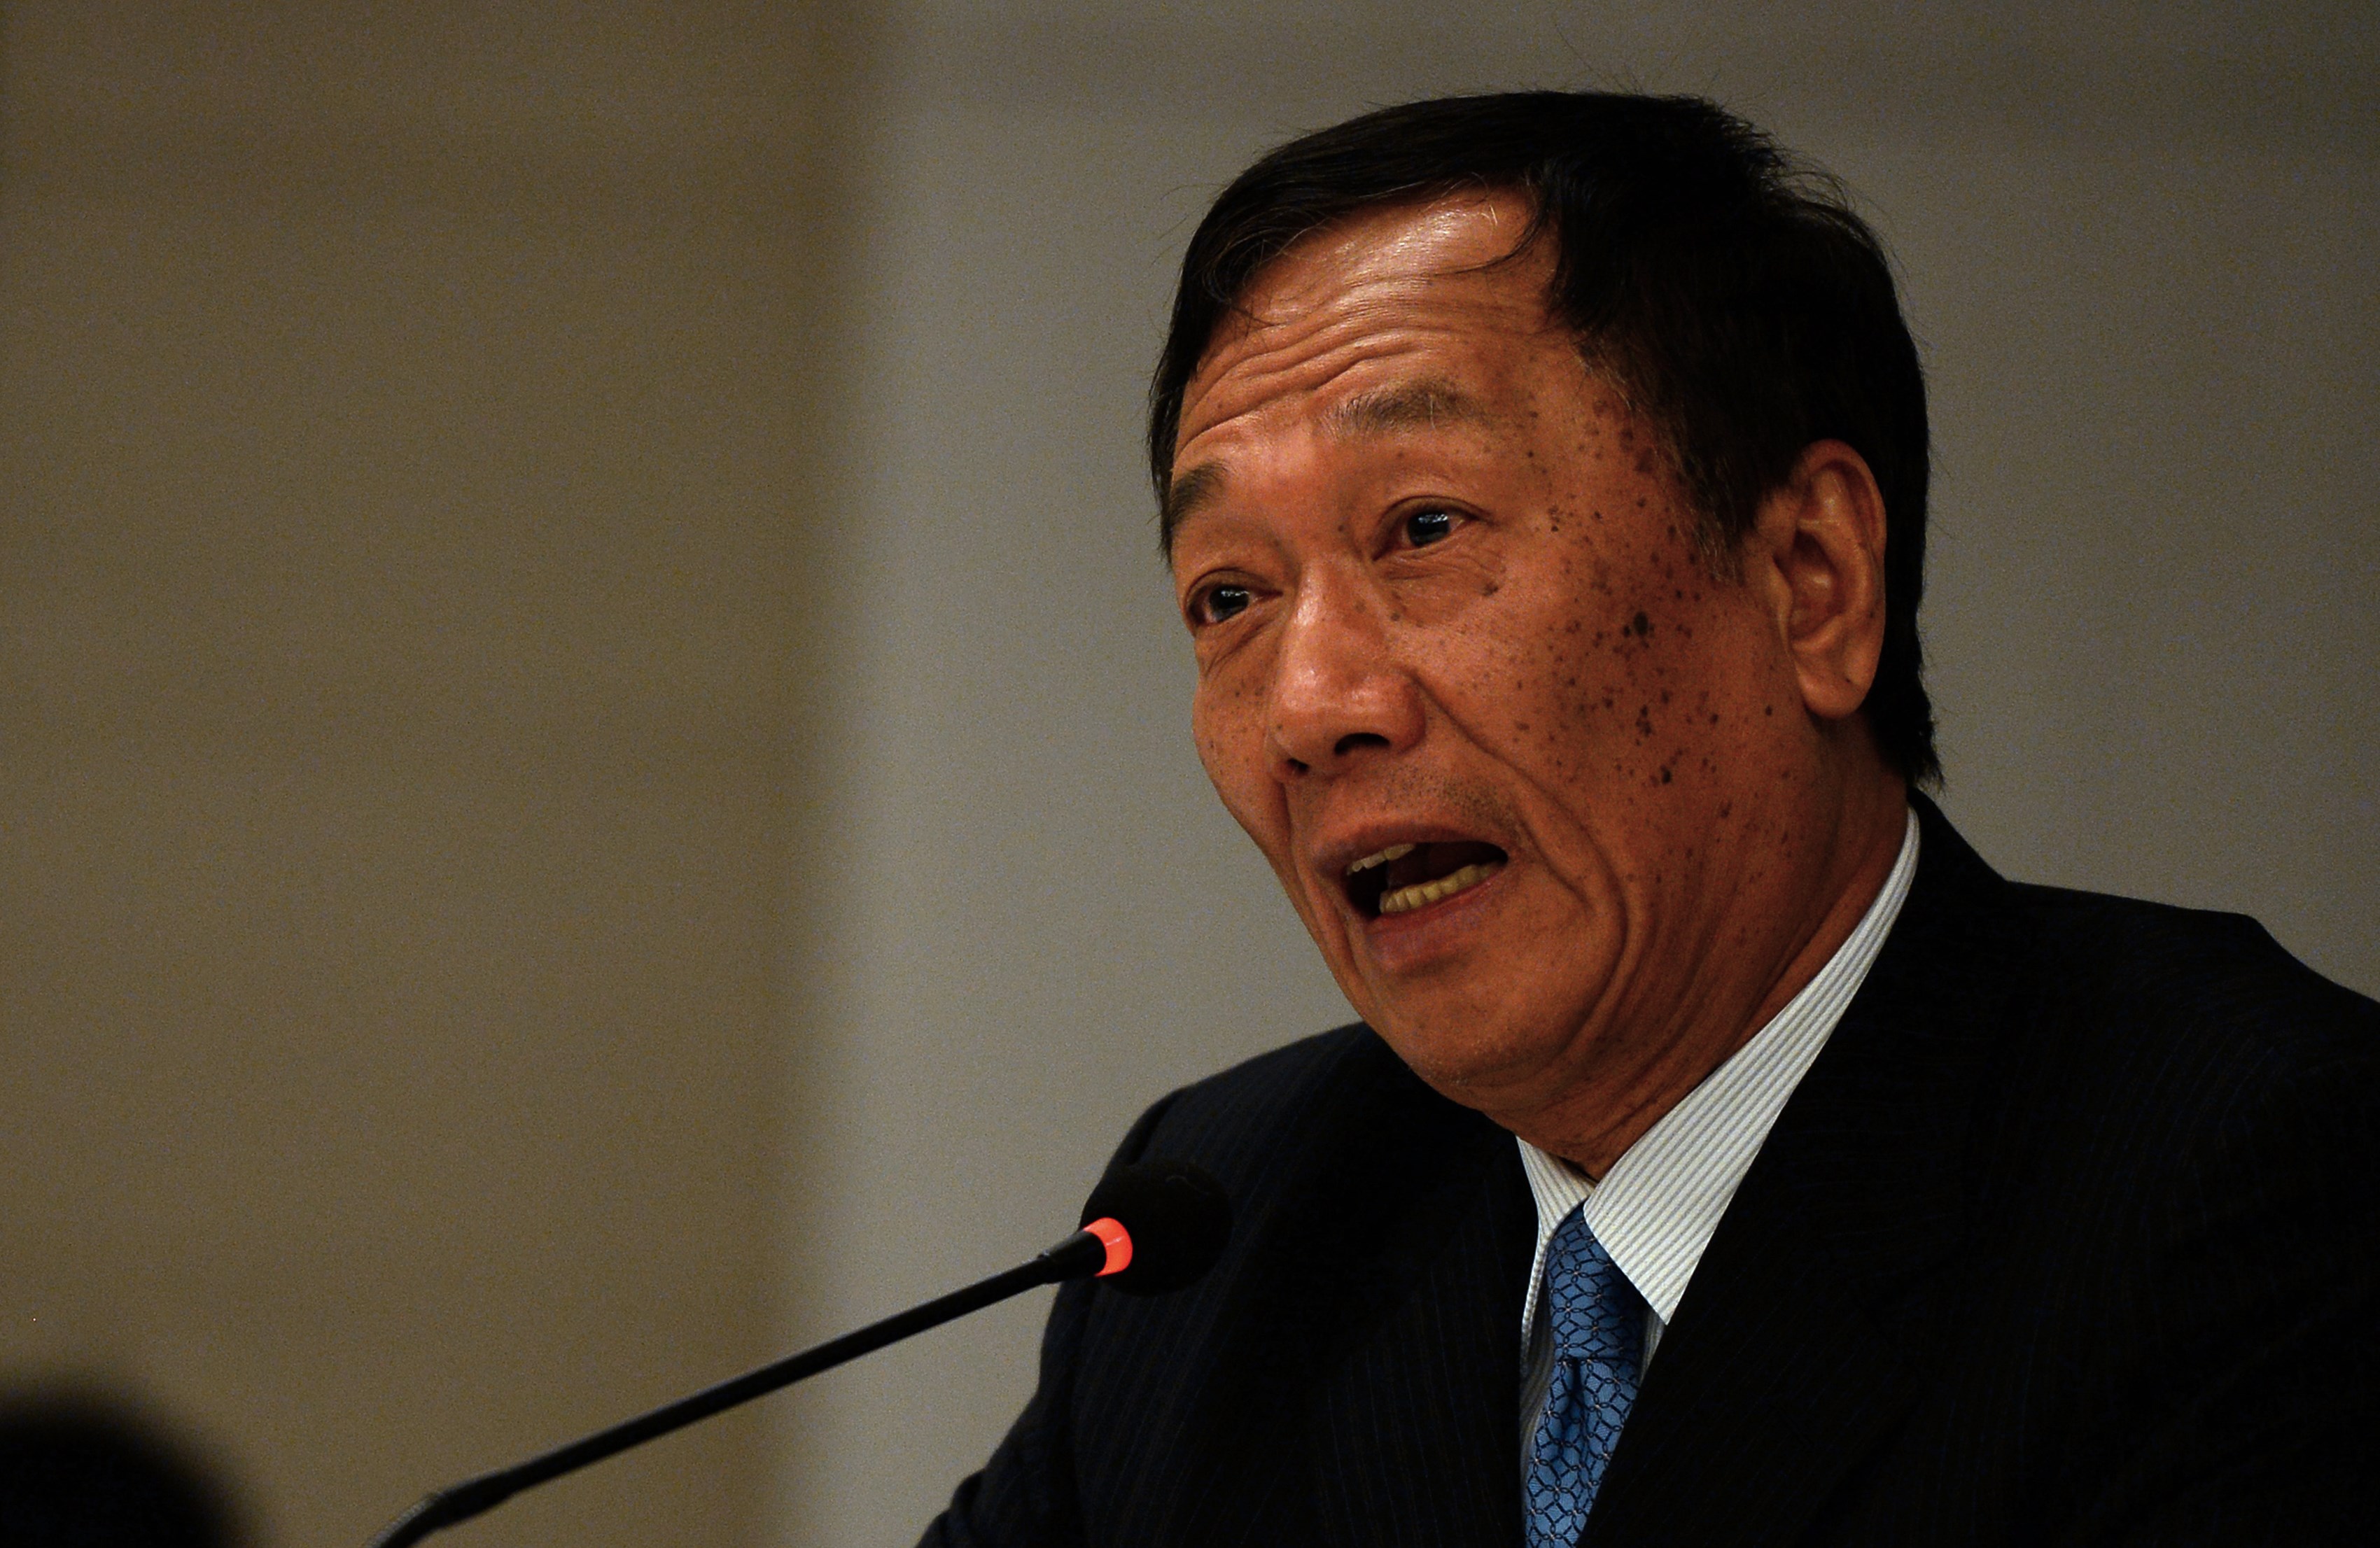 Chief Executive Officer of Taiwan-based electronics firm Foxconn Terry Gou addresses a press conference in New Delhi on Aug. 5, 2015. (Chandan Khanna—AFP/Getty Images)